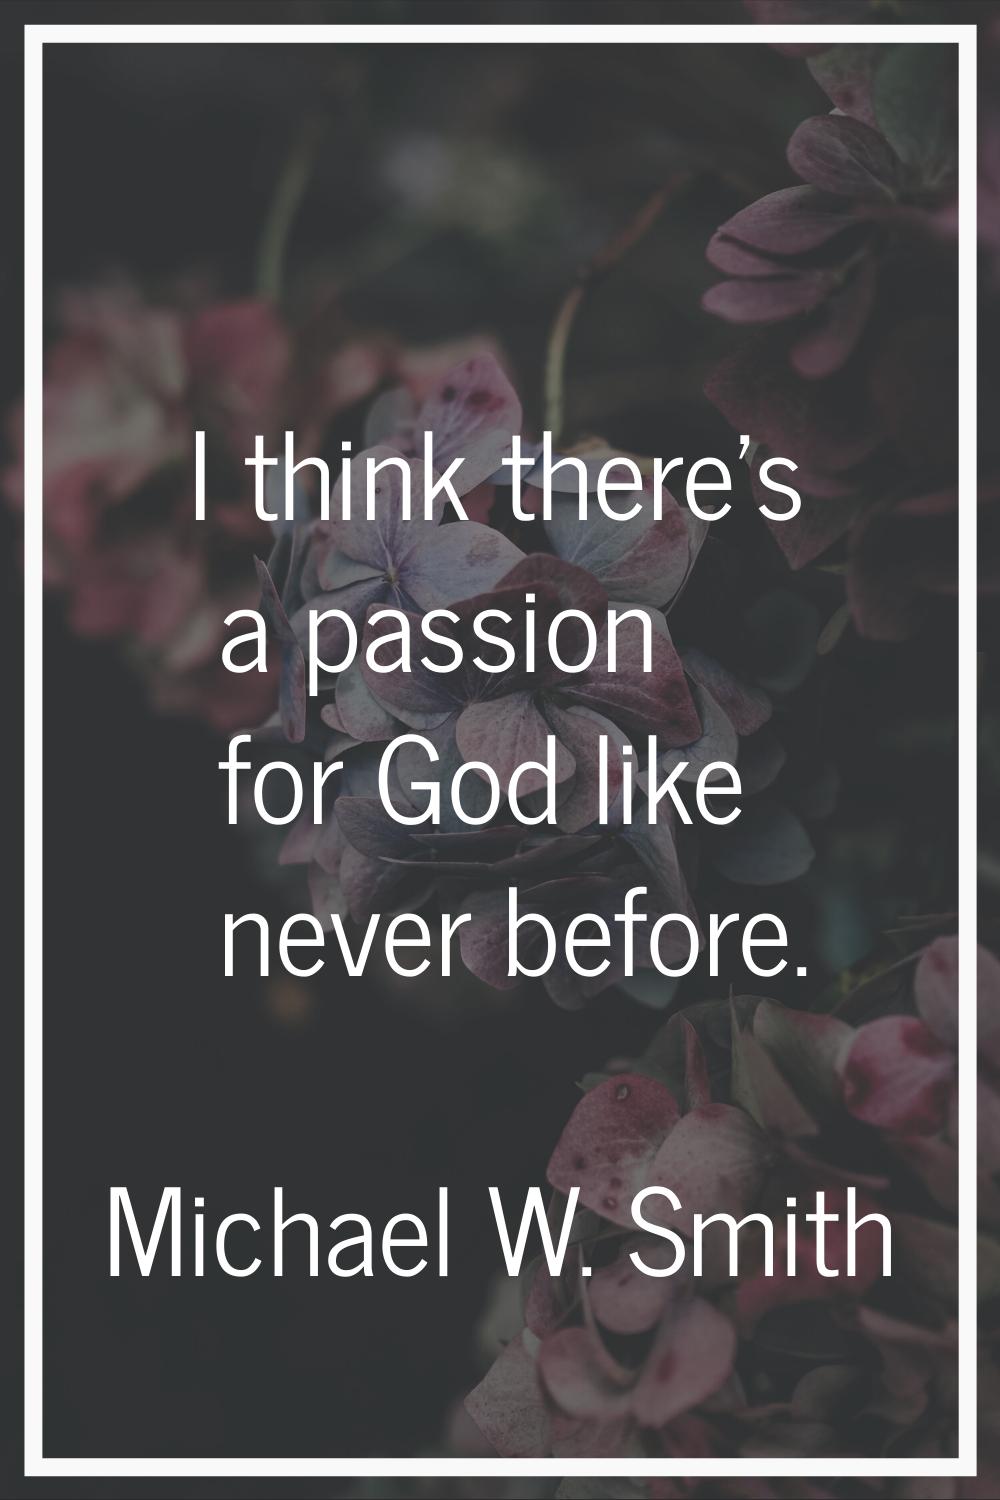 I think there's a passion for God like never before.